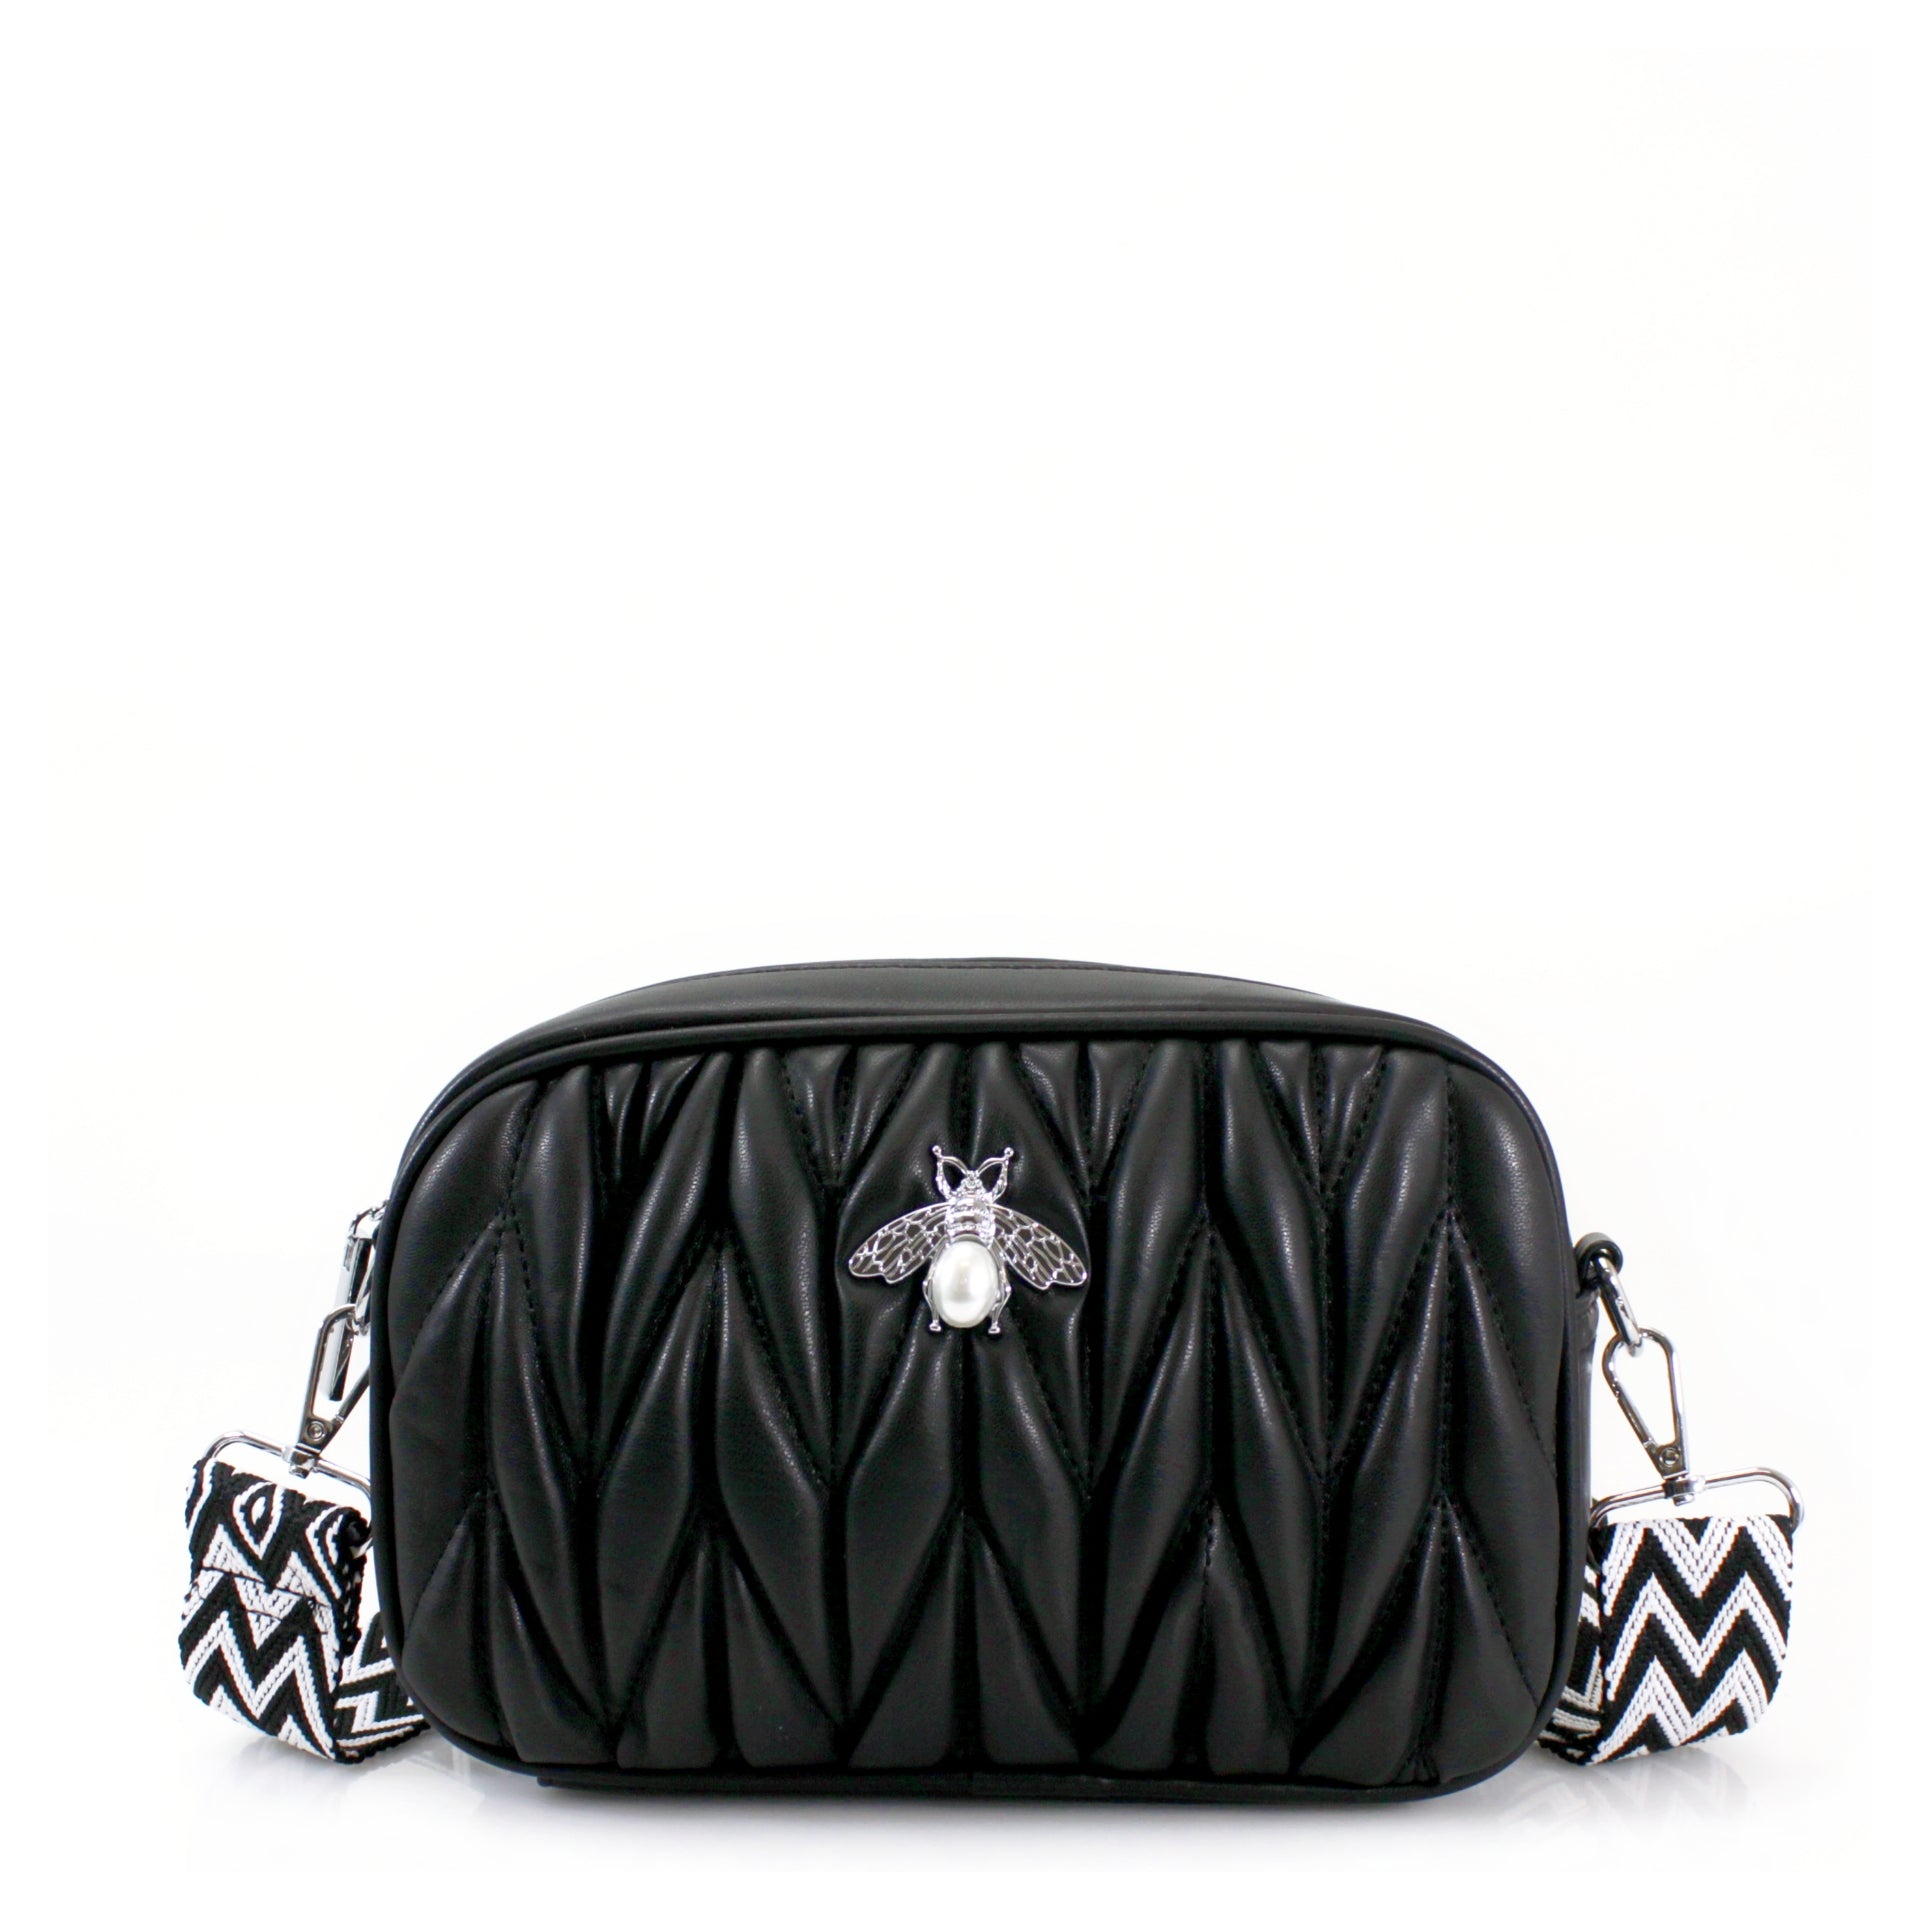 BLACK BEE LOGO QUILTED CROSS BODY BAG